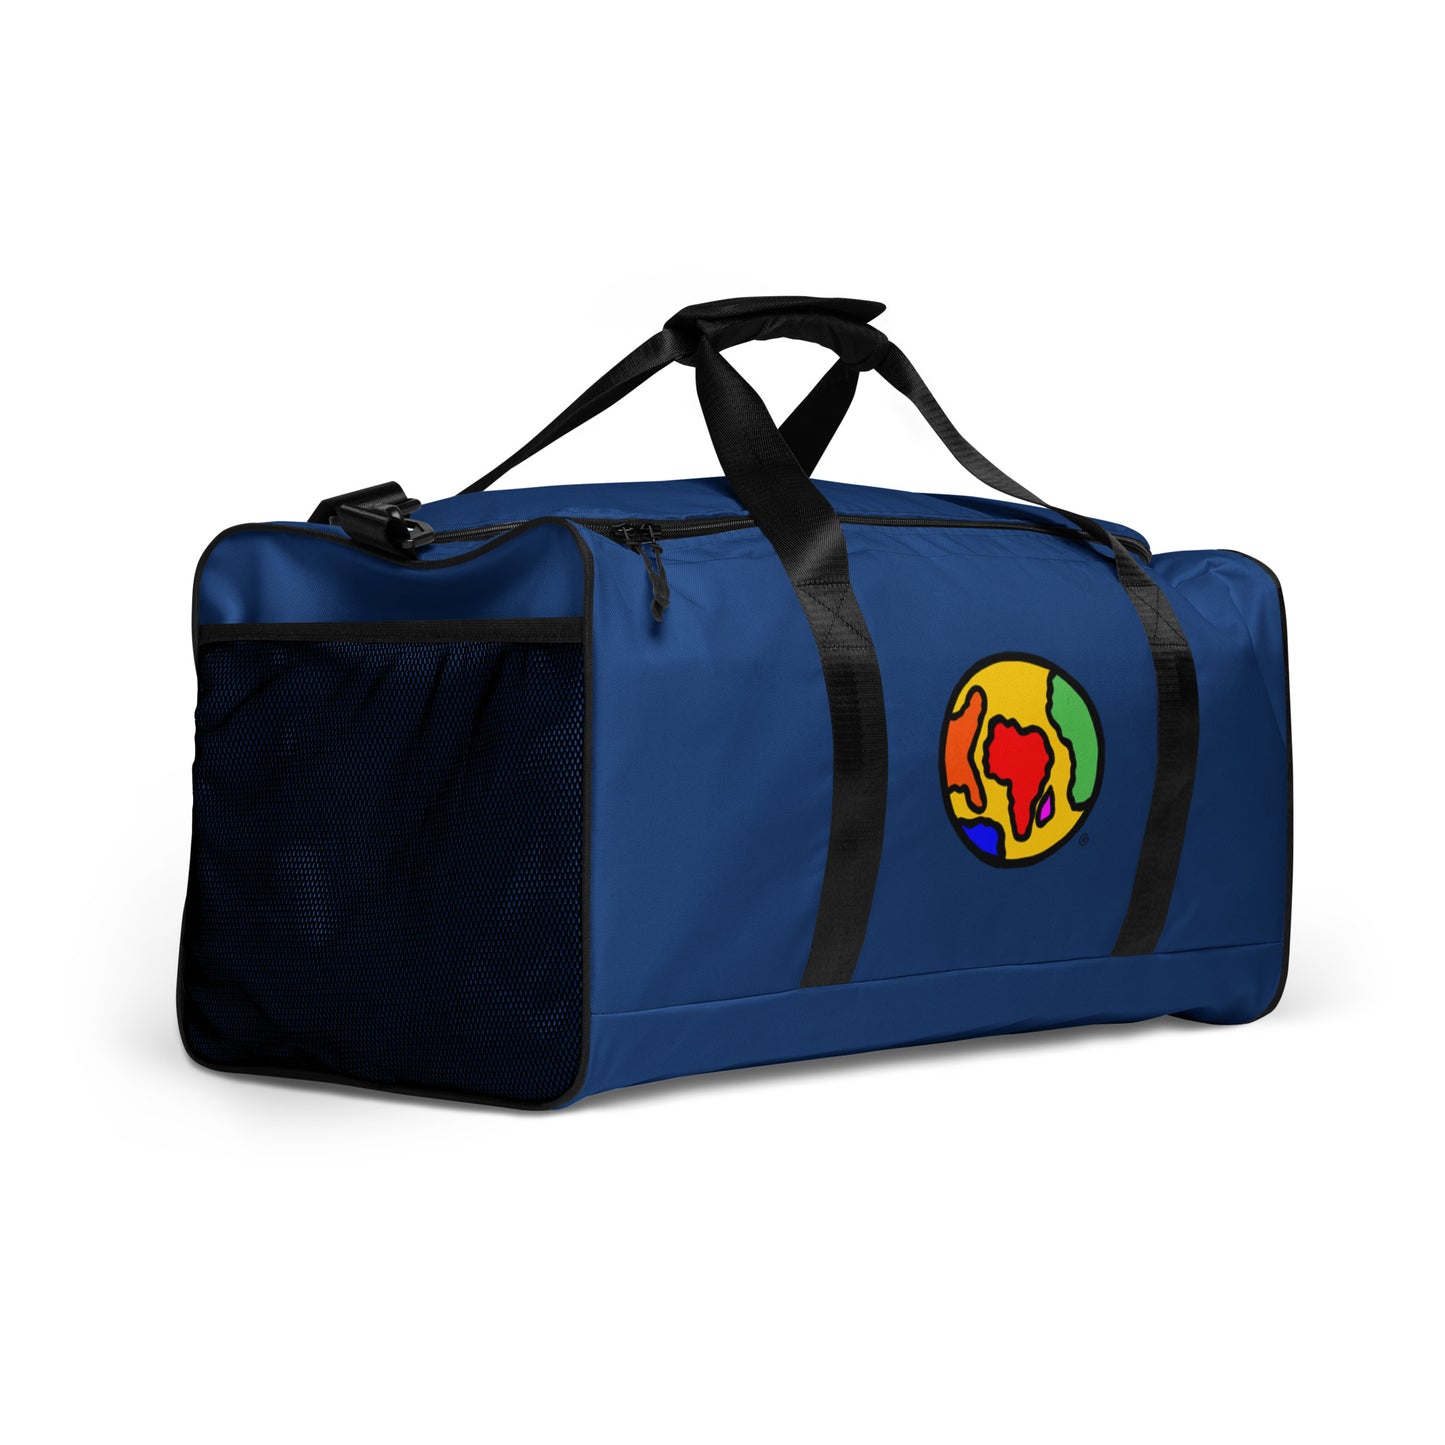 The Navy Duffle